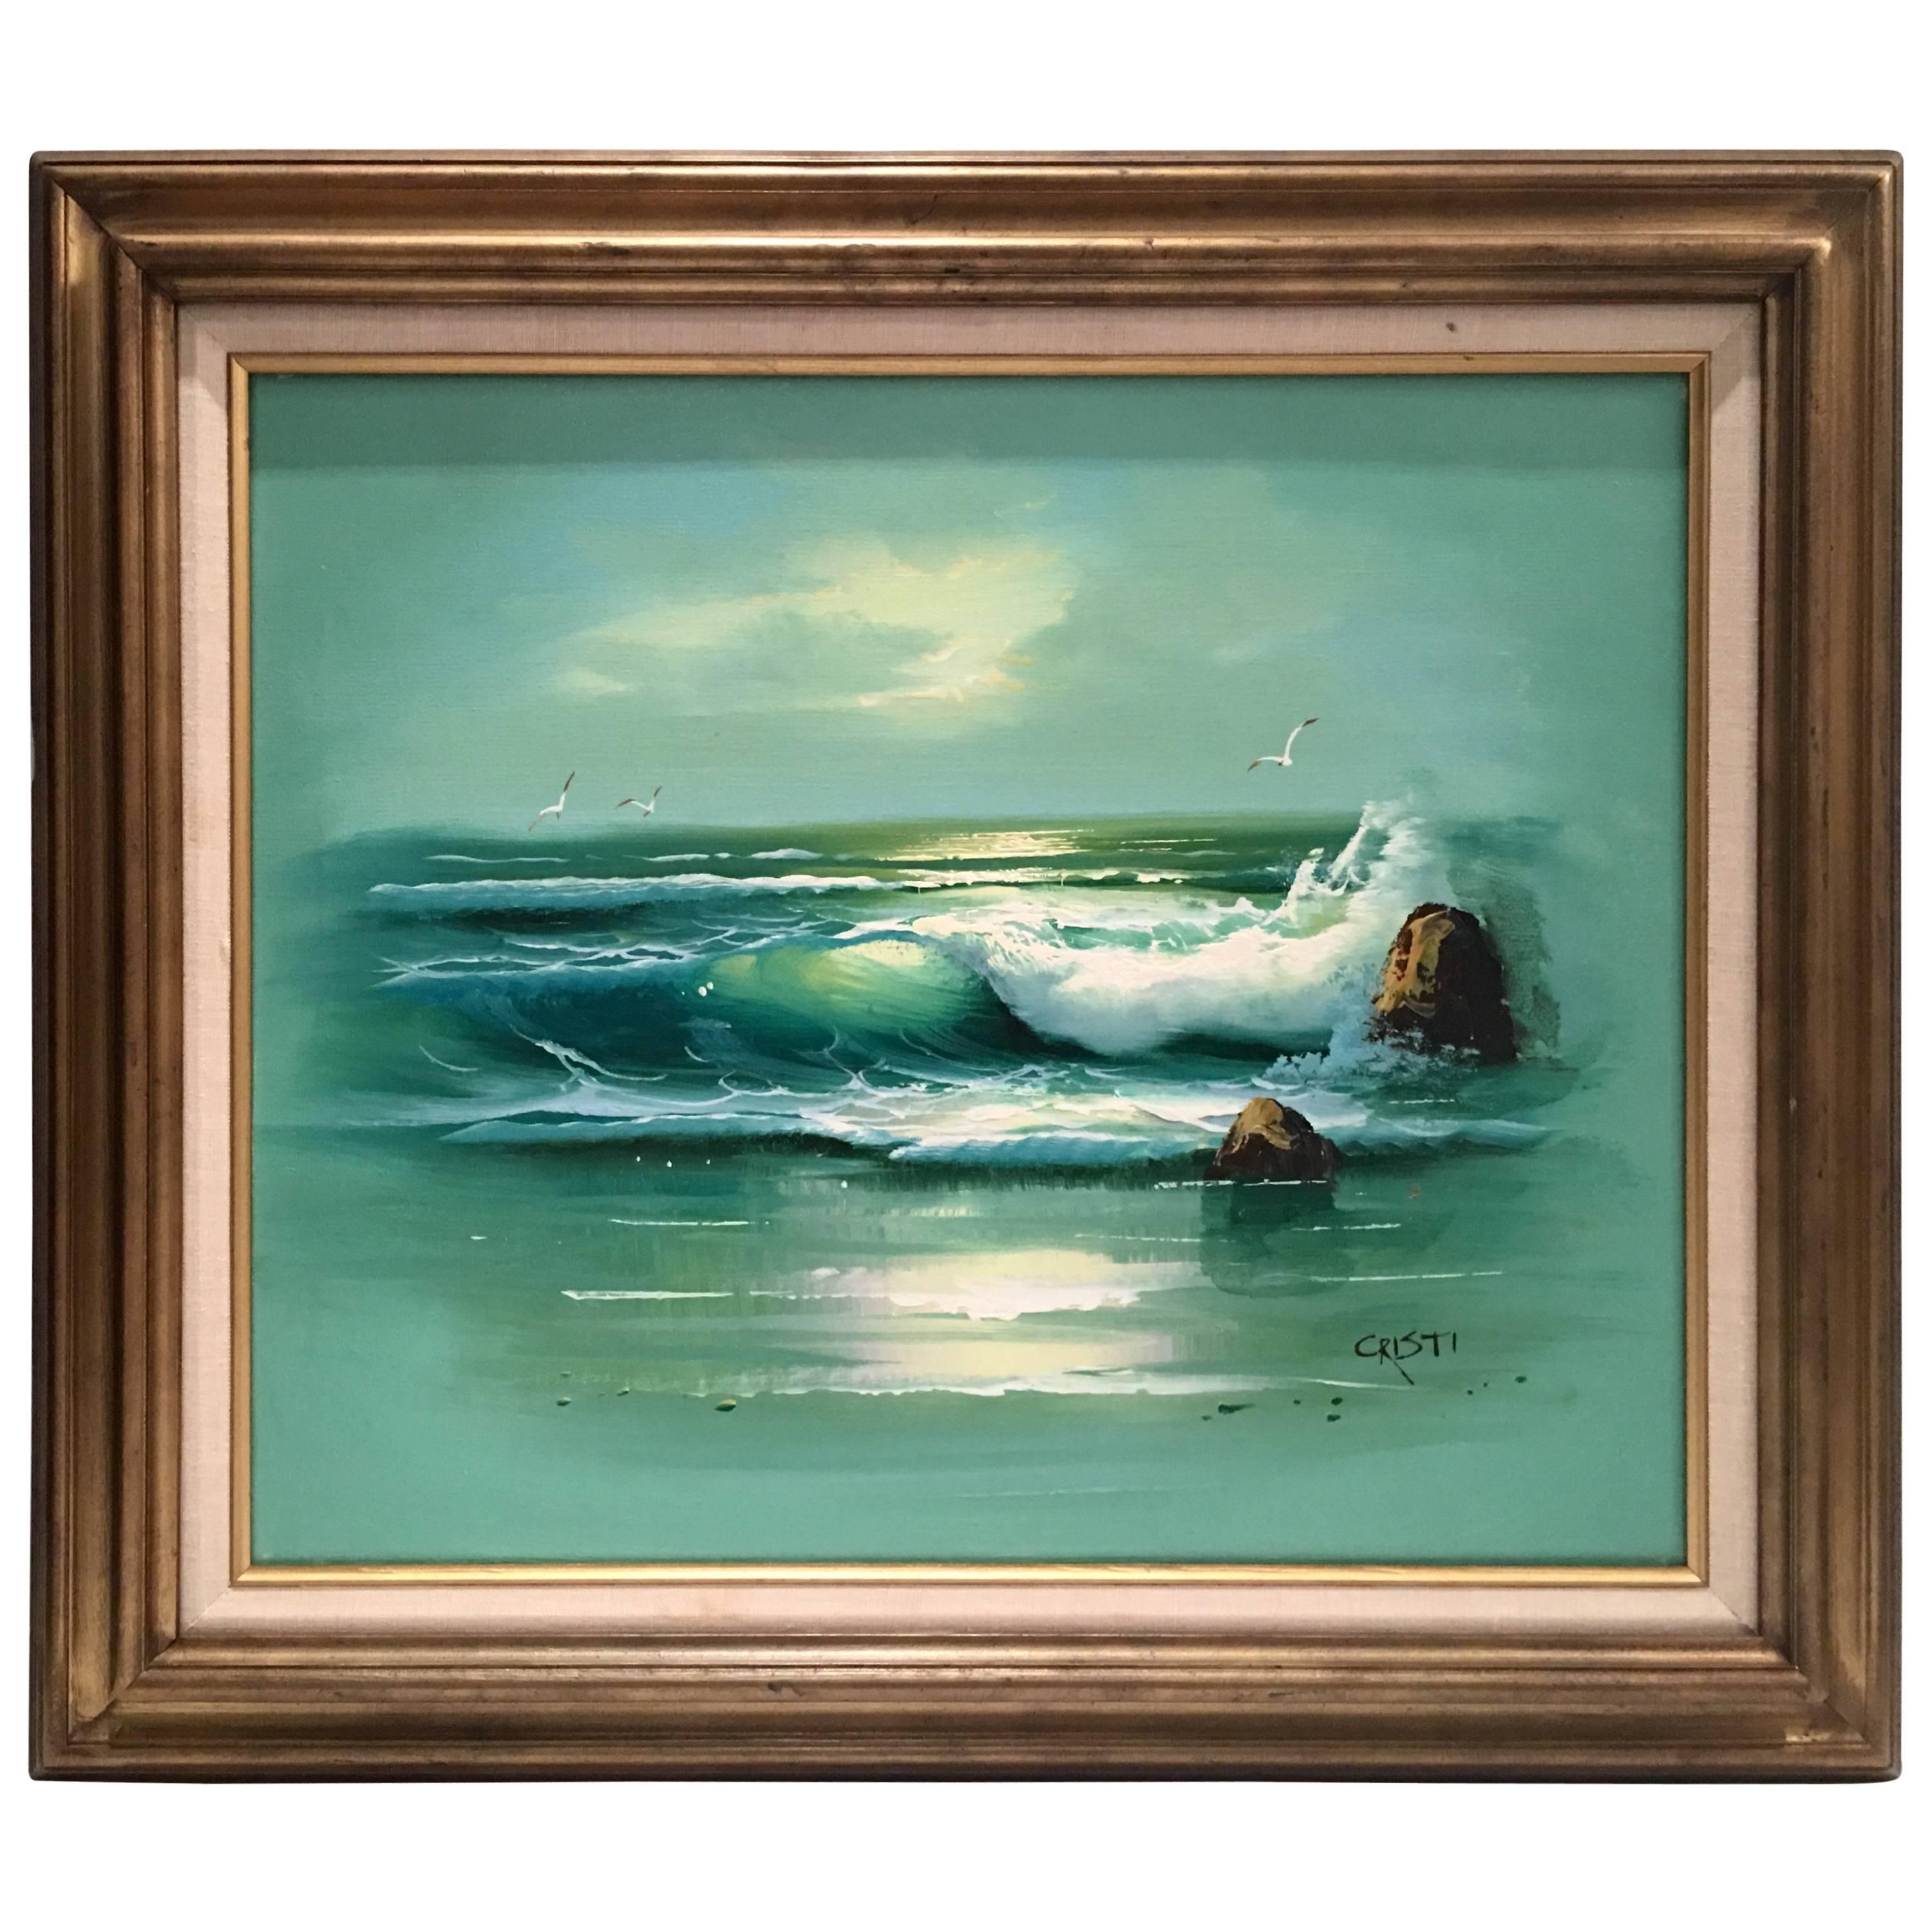 20th-Century Original Oil On Canvas Painting Ocean Scene  By, Cristi For Sale